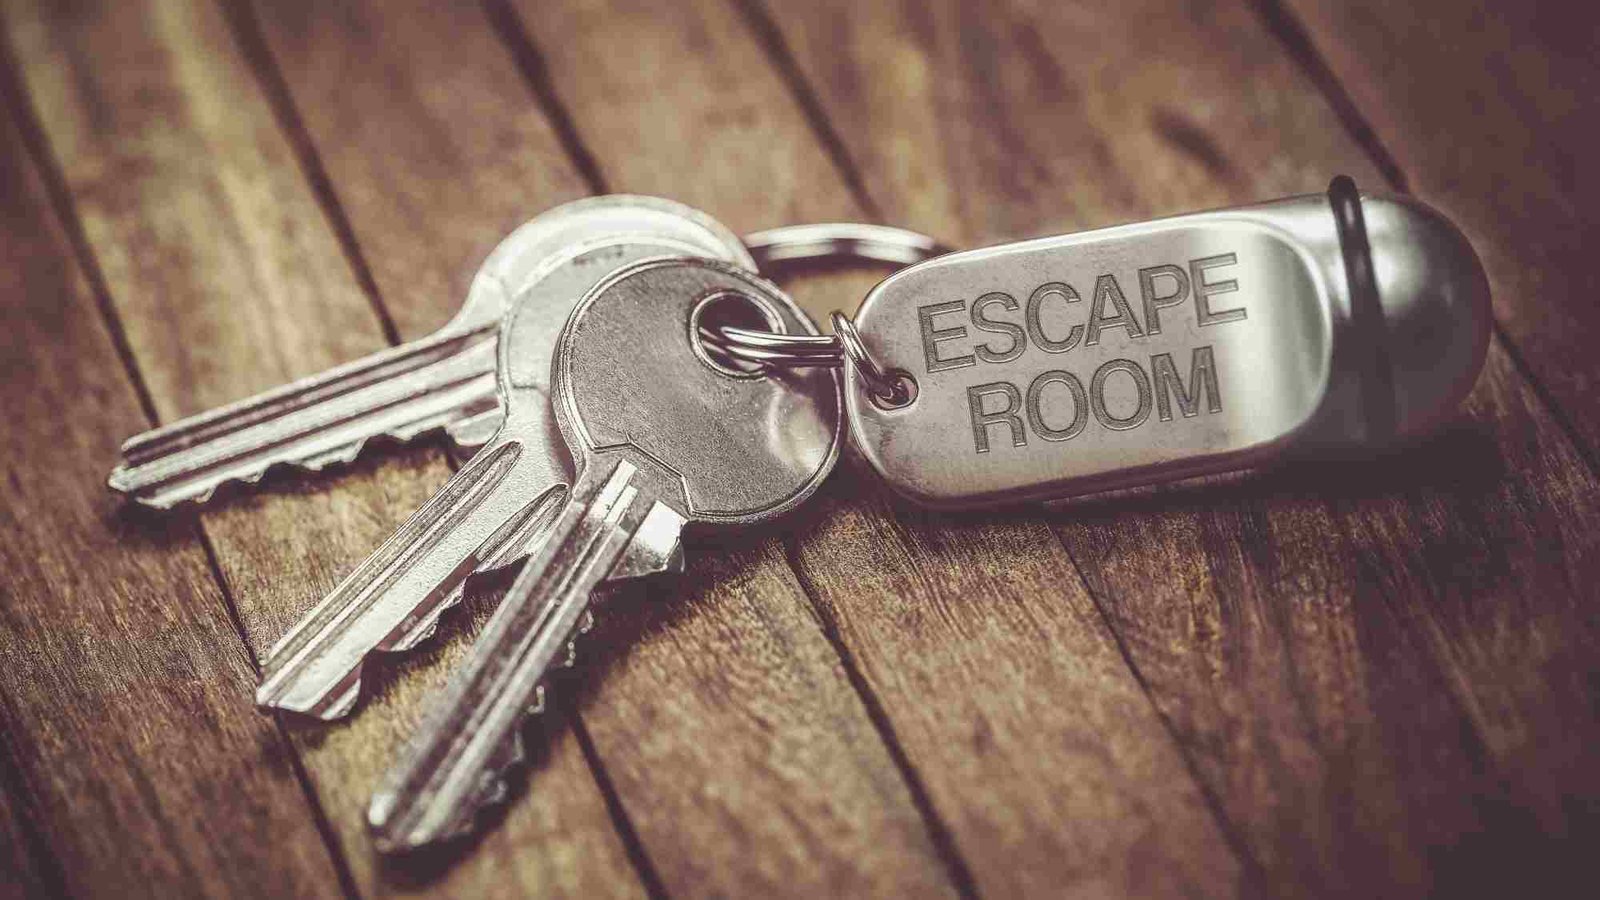 How to Beat an Escape Room